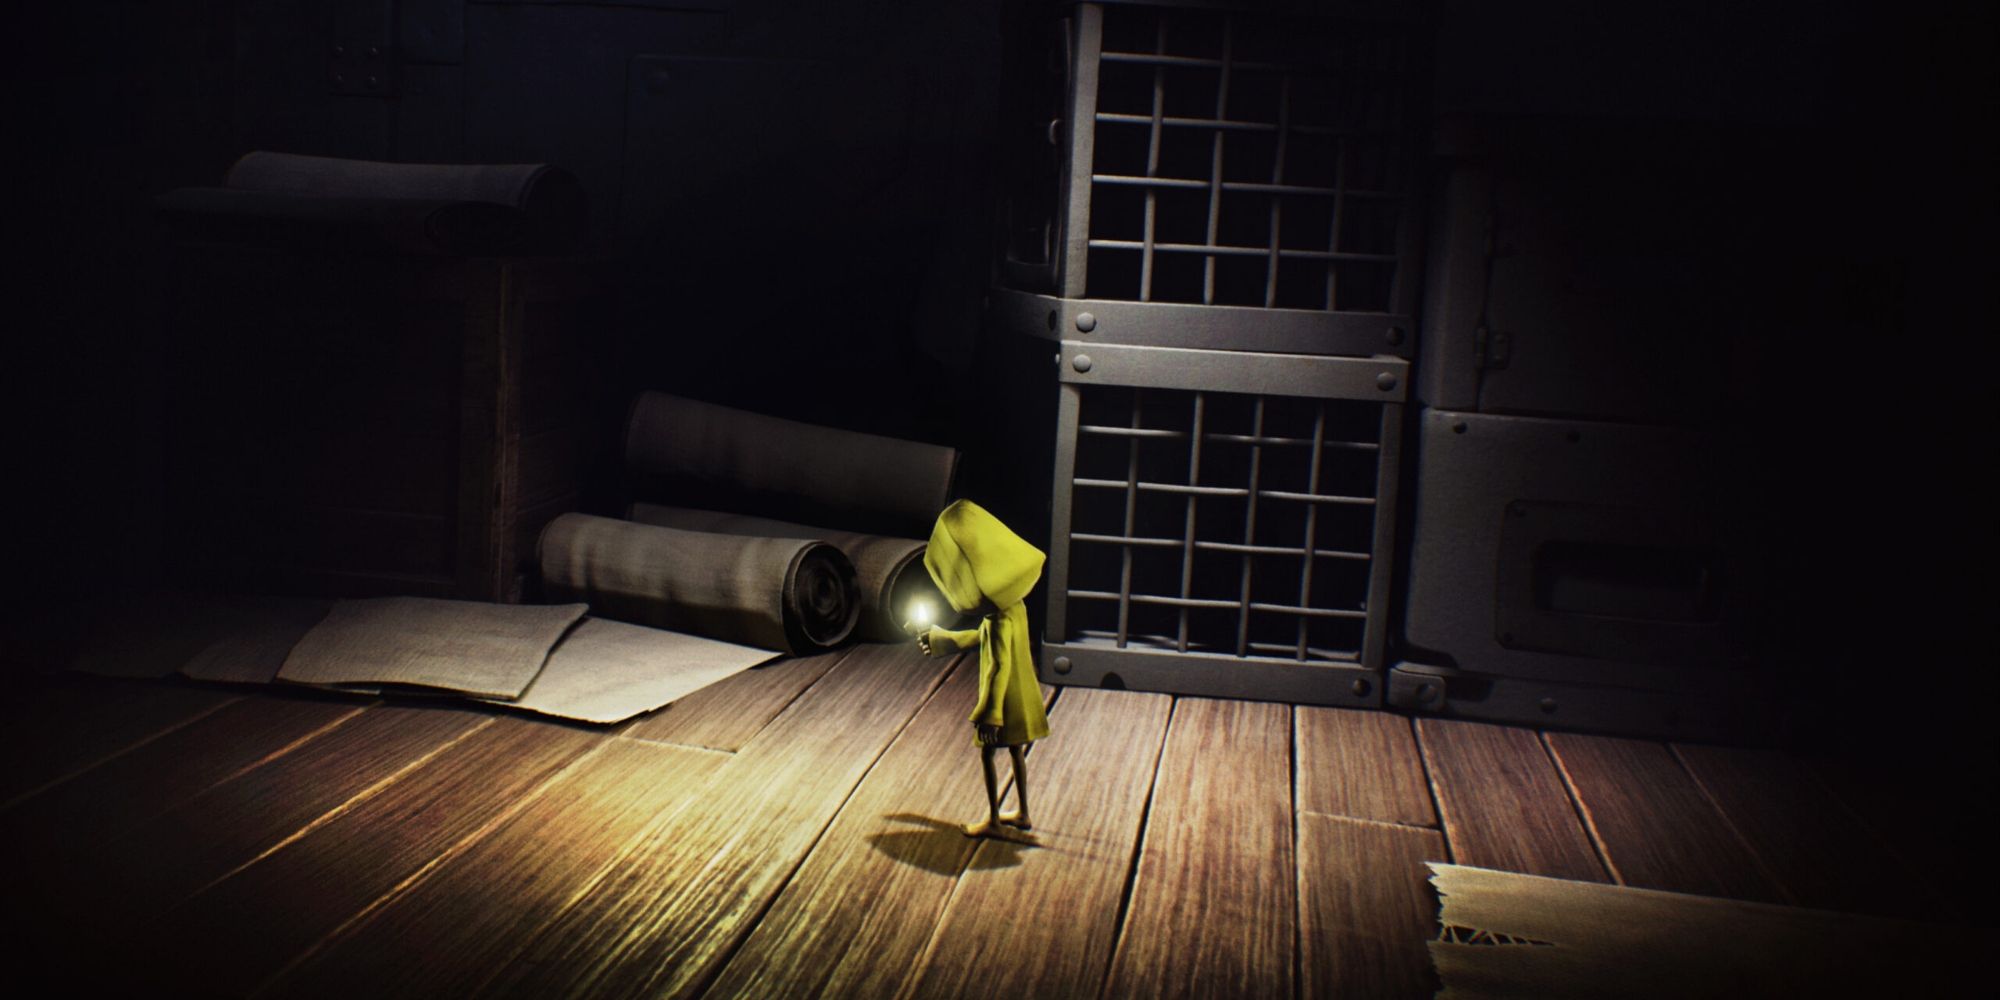 Six from Little Nightmares